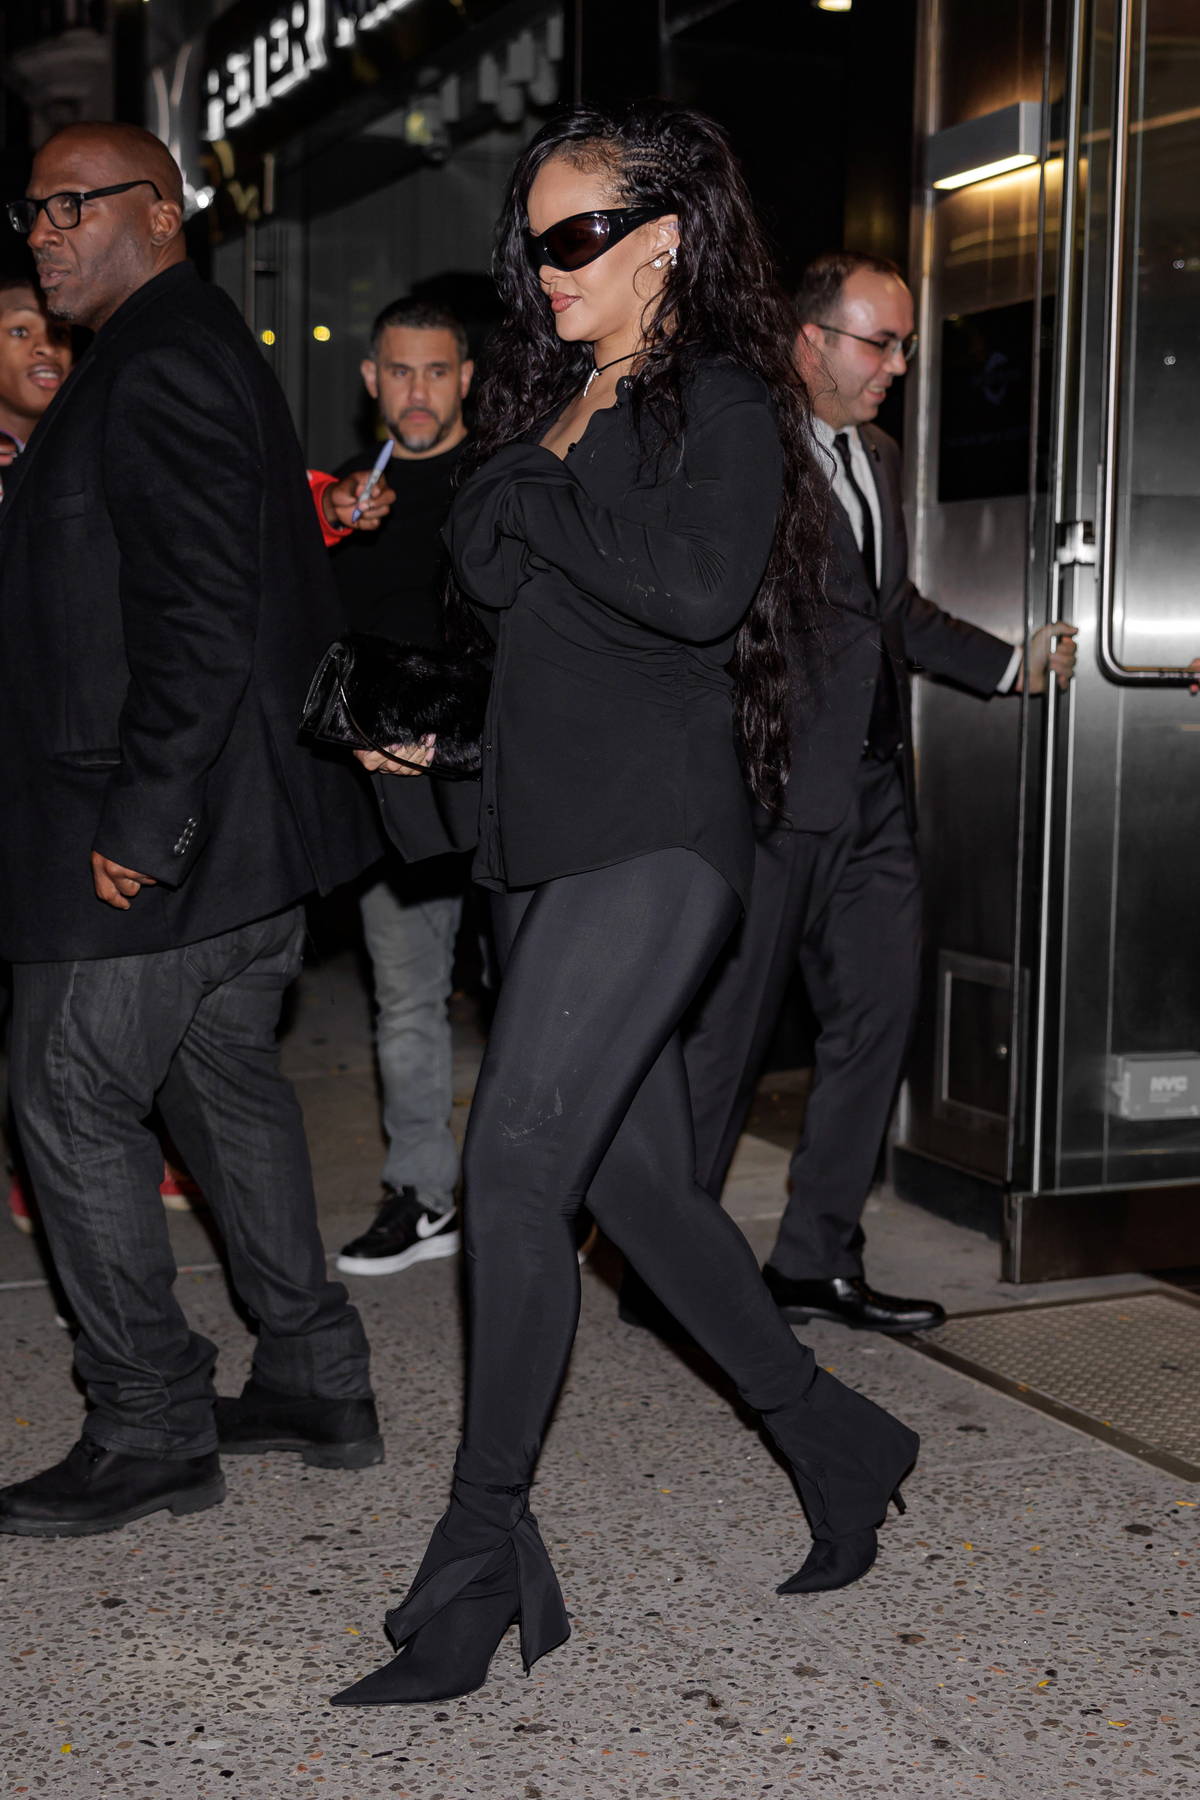 https://www.celebsfirst.com/wp-content/uploads/2022/11/rihanna-looks-stunning-a-black-shirt-with-matching-leggings-and-heels-while-stepping-out-for-dinner-in-new-york-city-051122_19.jpg